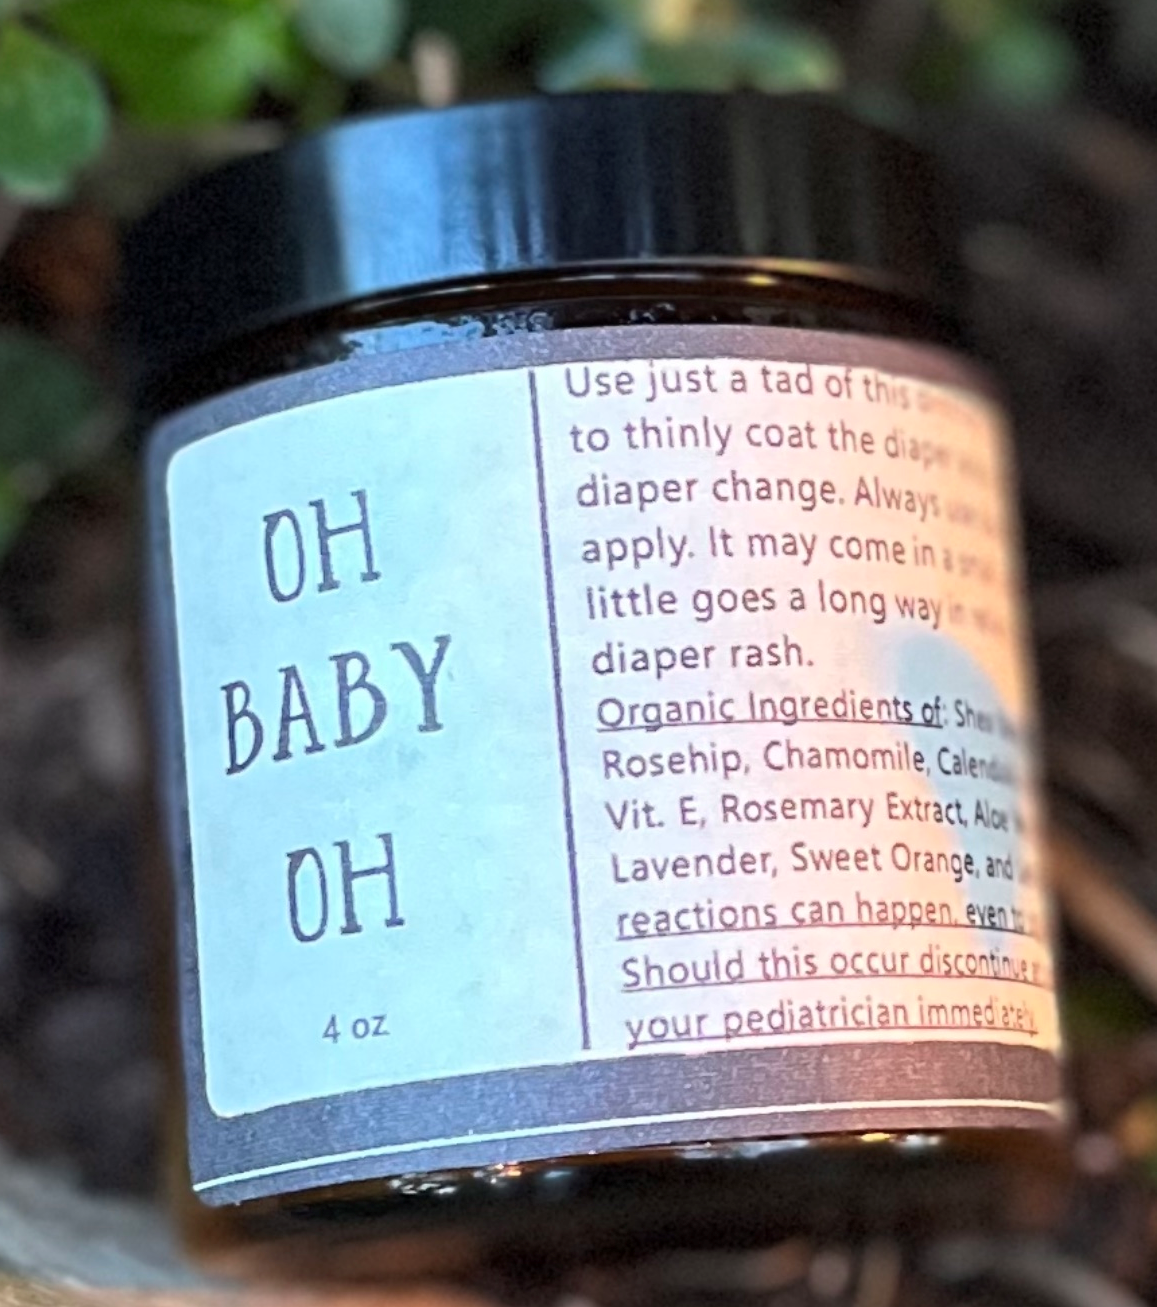 Oh Baby Oh! " What a bum!" Organic Diaper Balm - to help soothe any bottom (including adults)